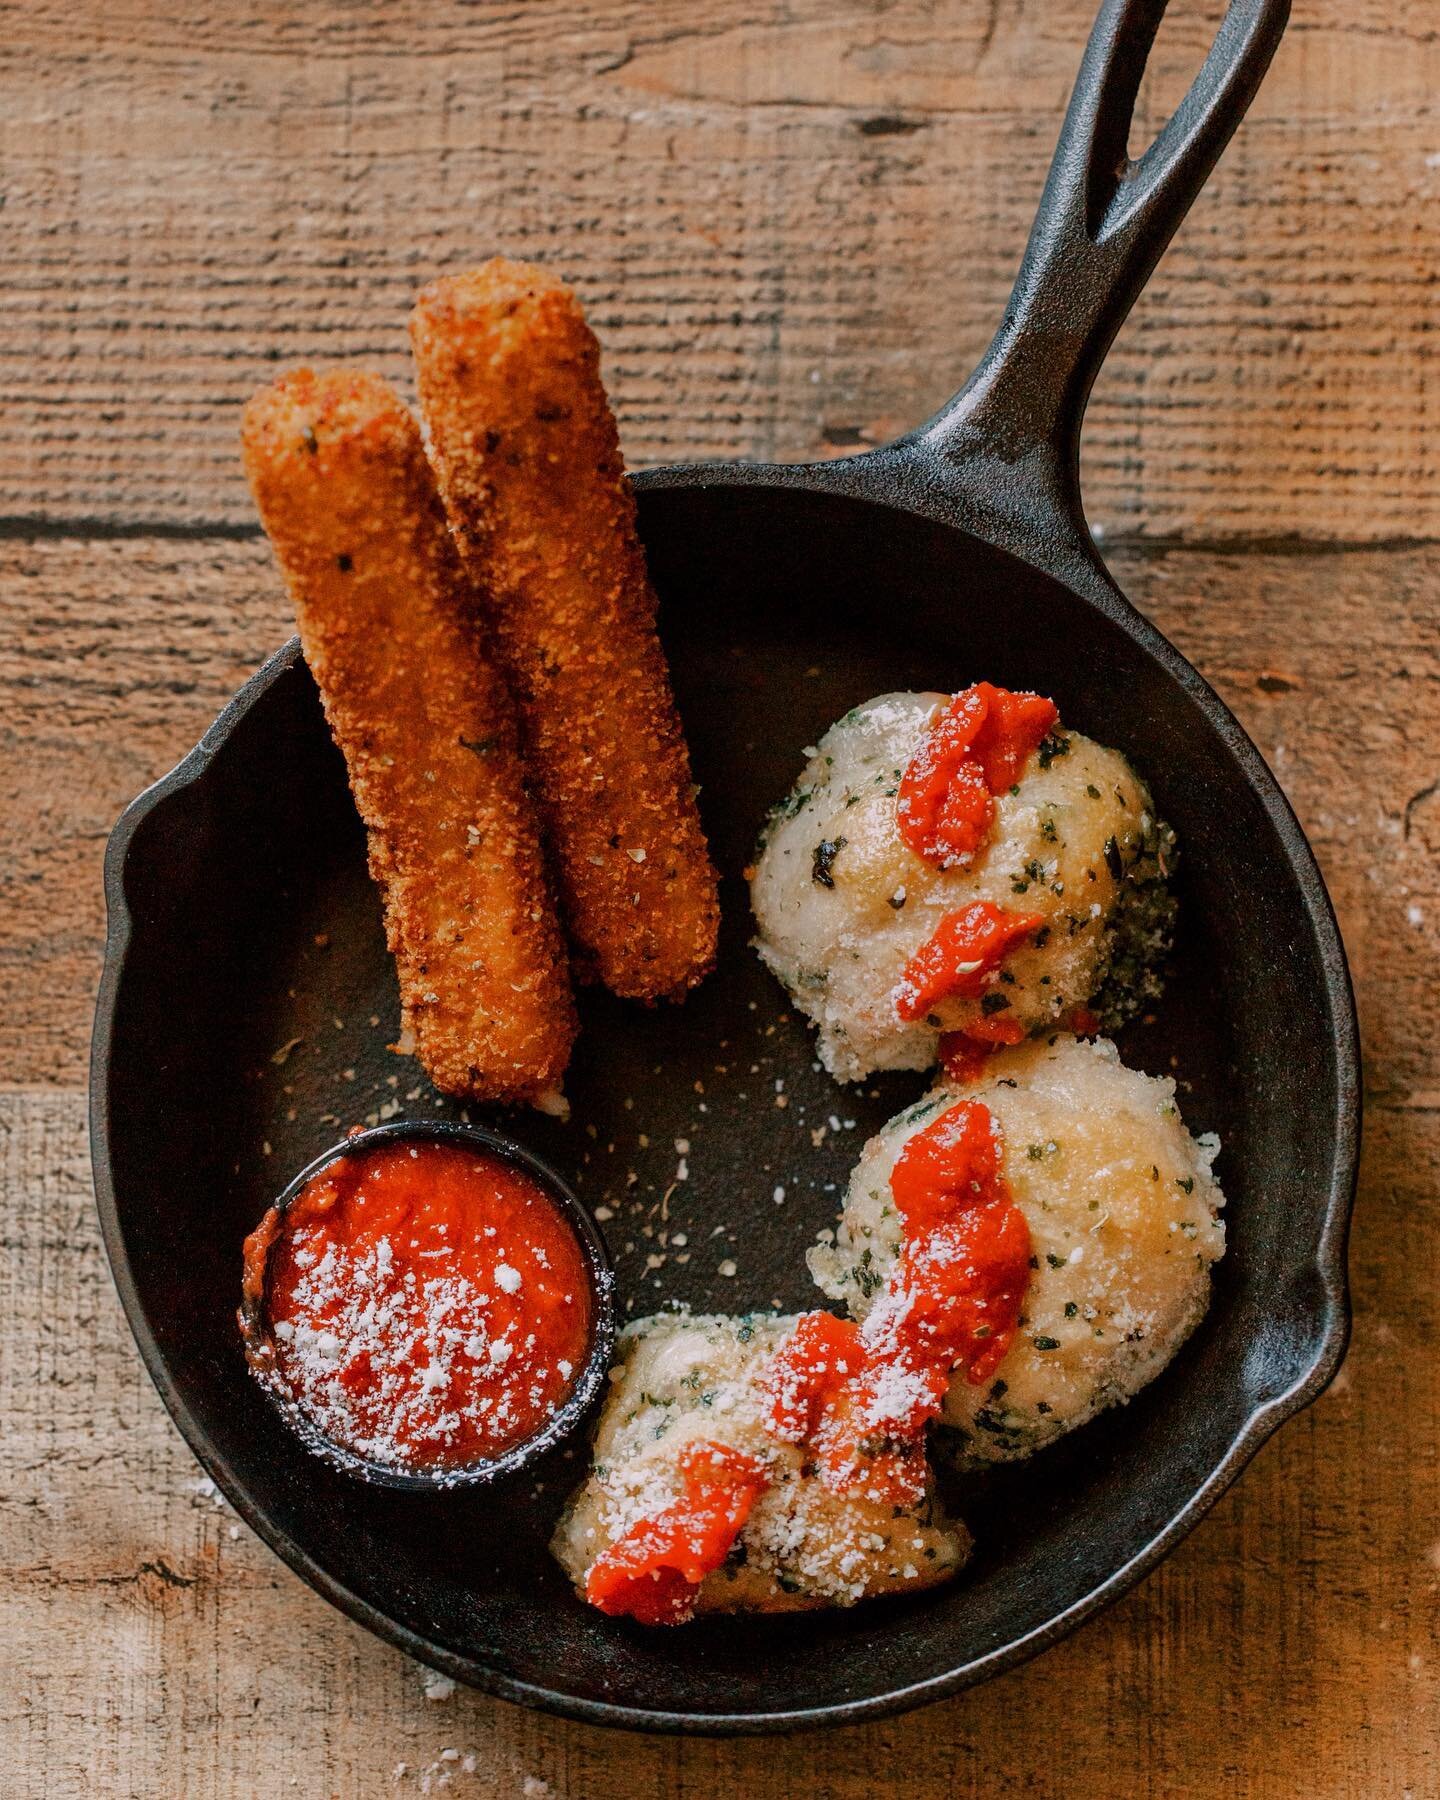 Get your cheesy fix with our garlic knots and mozzarella sticks! 🧀 

Made with fresh, house-made dough and roasted garlic and parm, our garlic knots are the perfect appetizer or side dish to any pizza. 🤤 

And don't forget about our crispy mozzarel